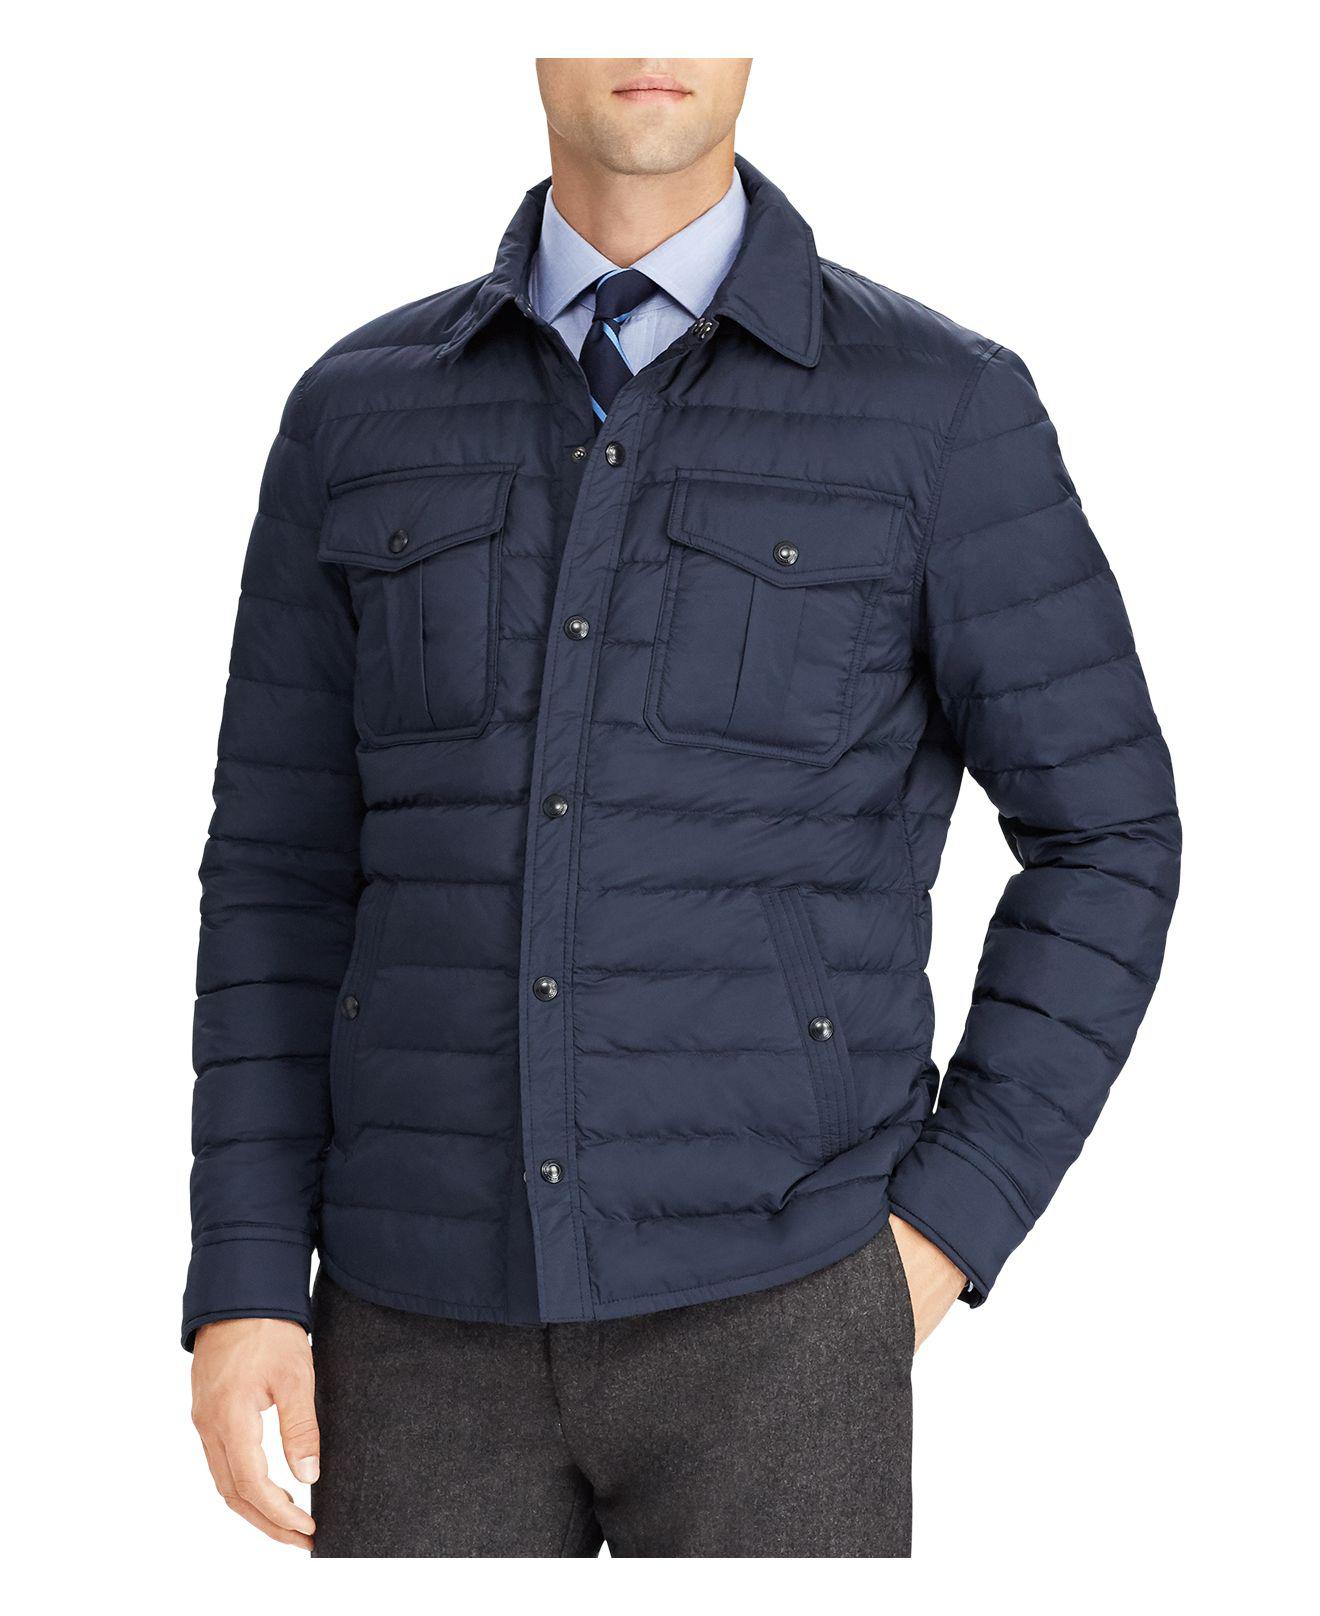 Lyst - Polo Ralph Lauren Quilted Down Shirt Jacket in Blue for Men